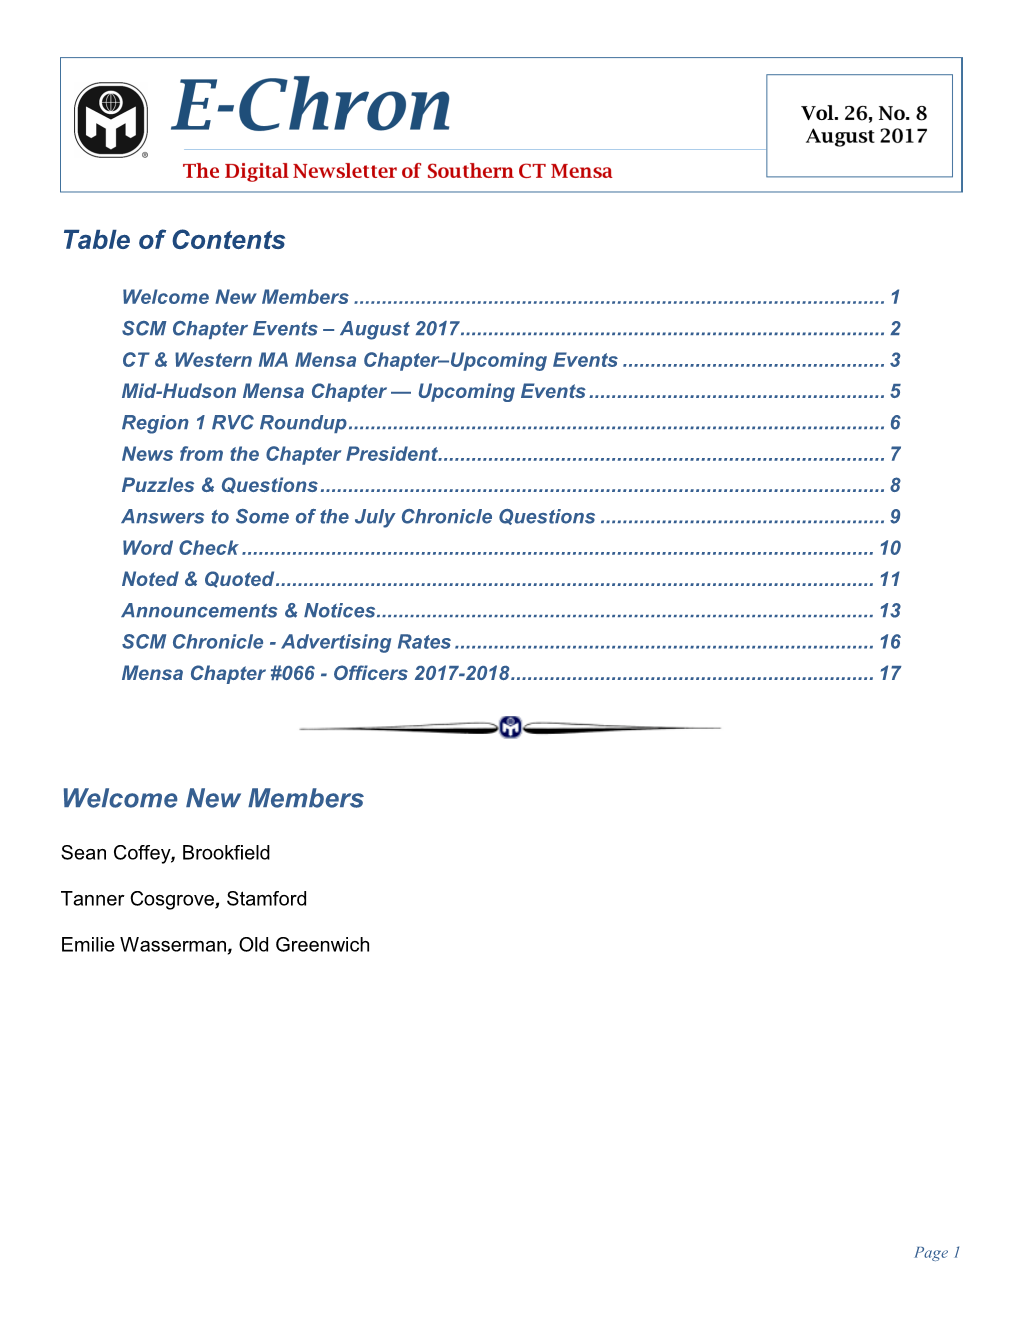 Table of Contents Welcome New Members